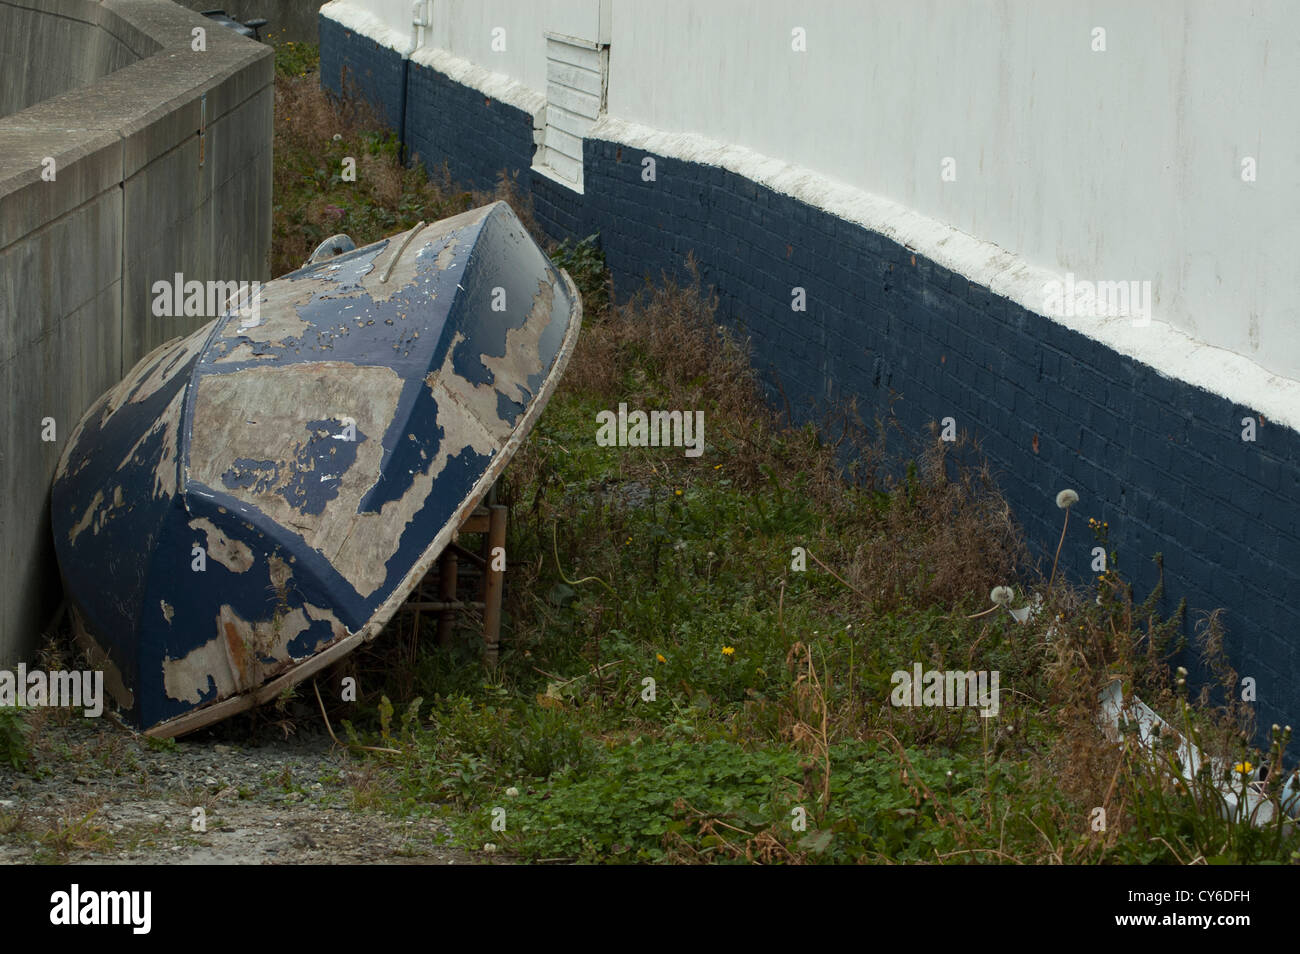 Upturned boat in need of repair. Stock Photo